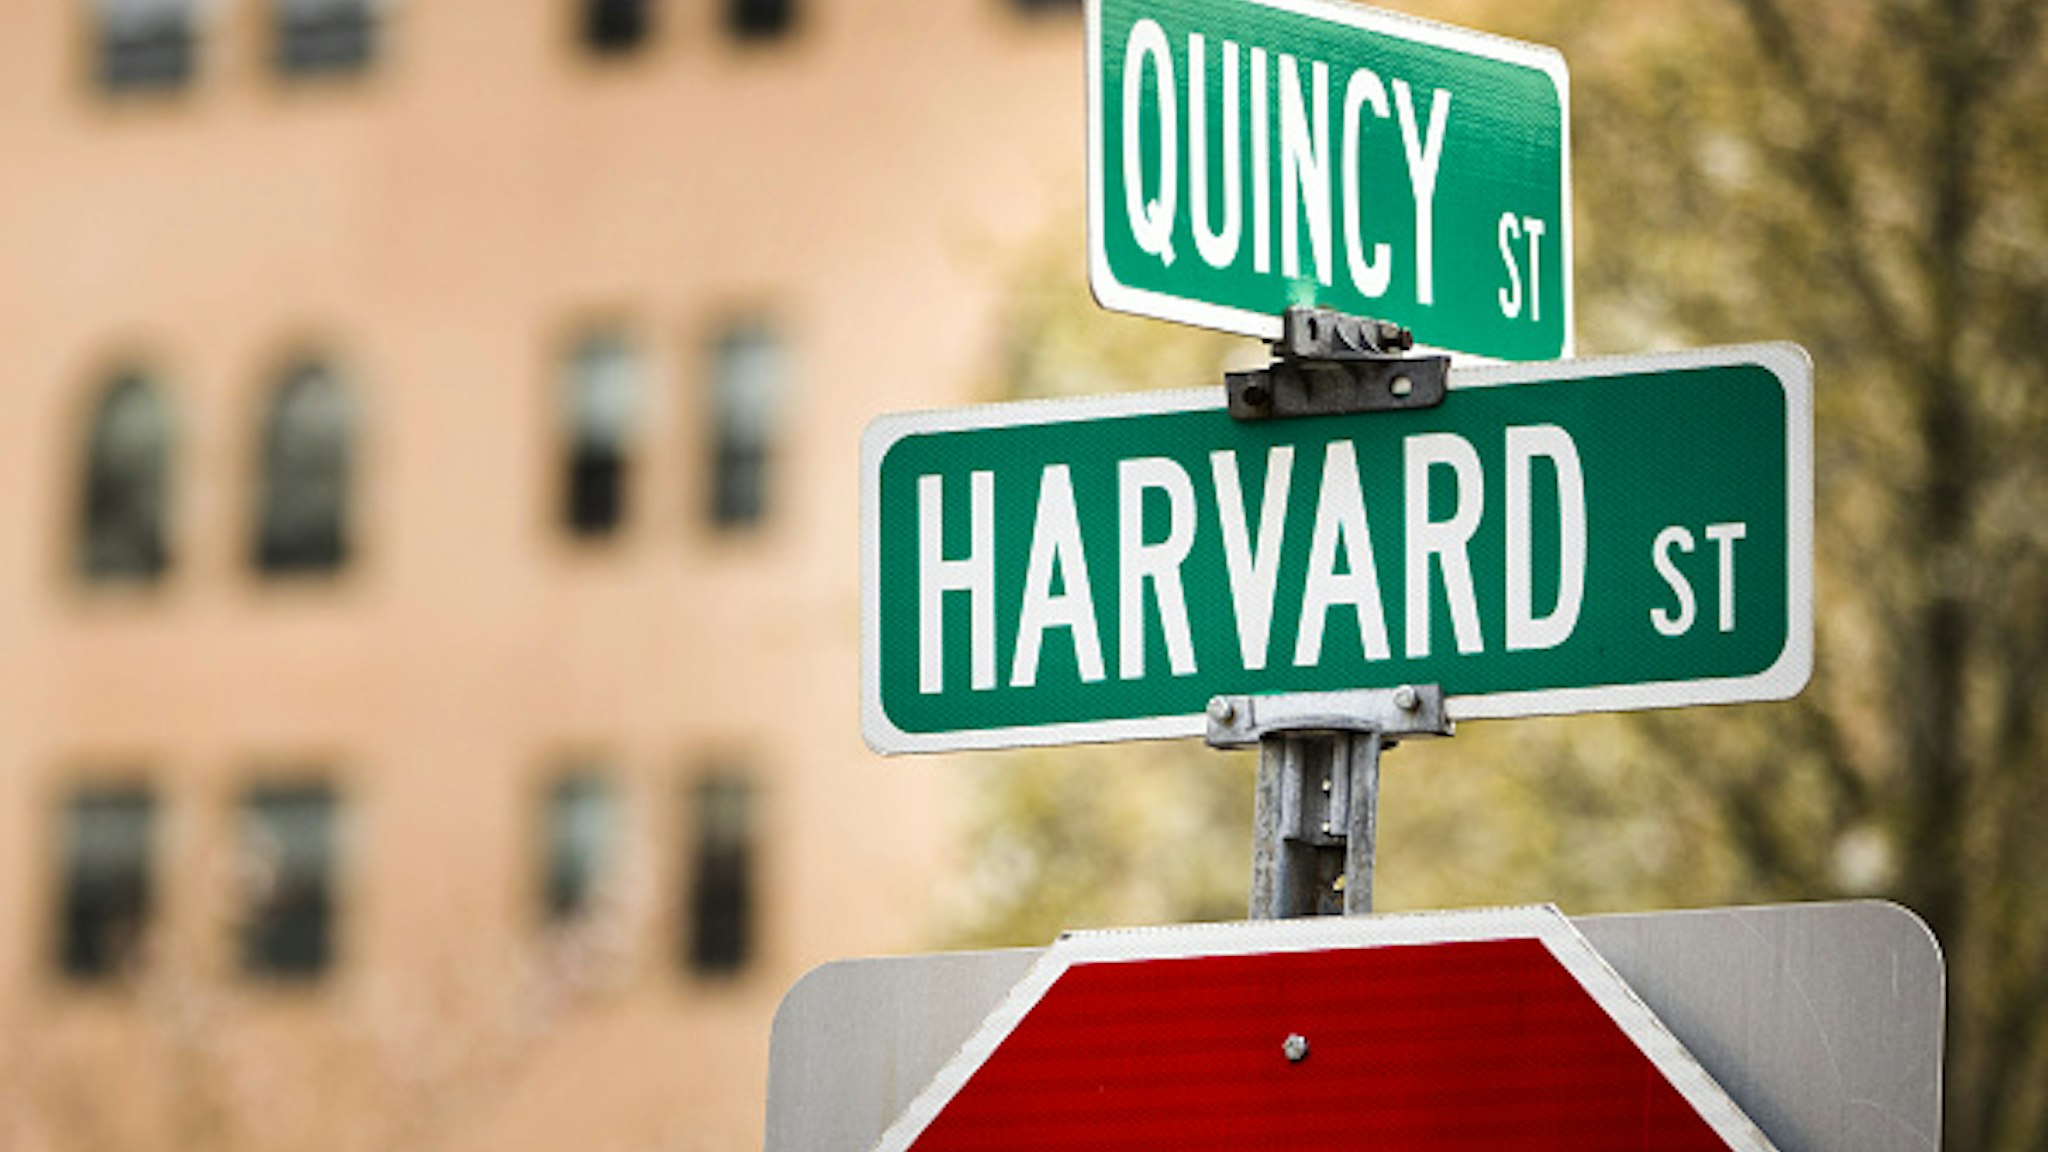 A street sign stands at the intersection of Quincy and Harvard streets near Harvard University in Cambridge, Massachusetts, U.S., on Monday, April 20, 2020. College financial aid offices are bracing for a spike in appeals from students finding that the aid packages they were offered for next year are no longer enough after the coronavirus pandemic cost their parents jobs or income.